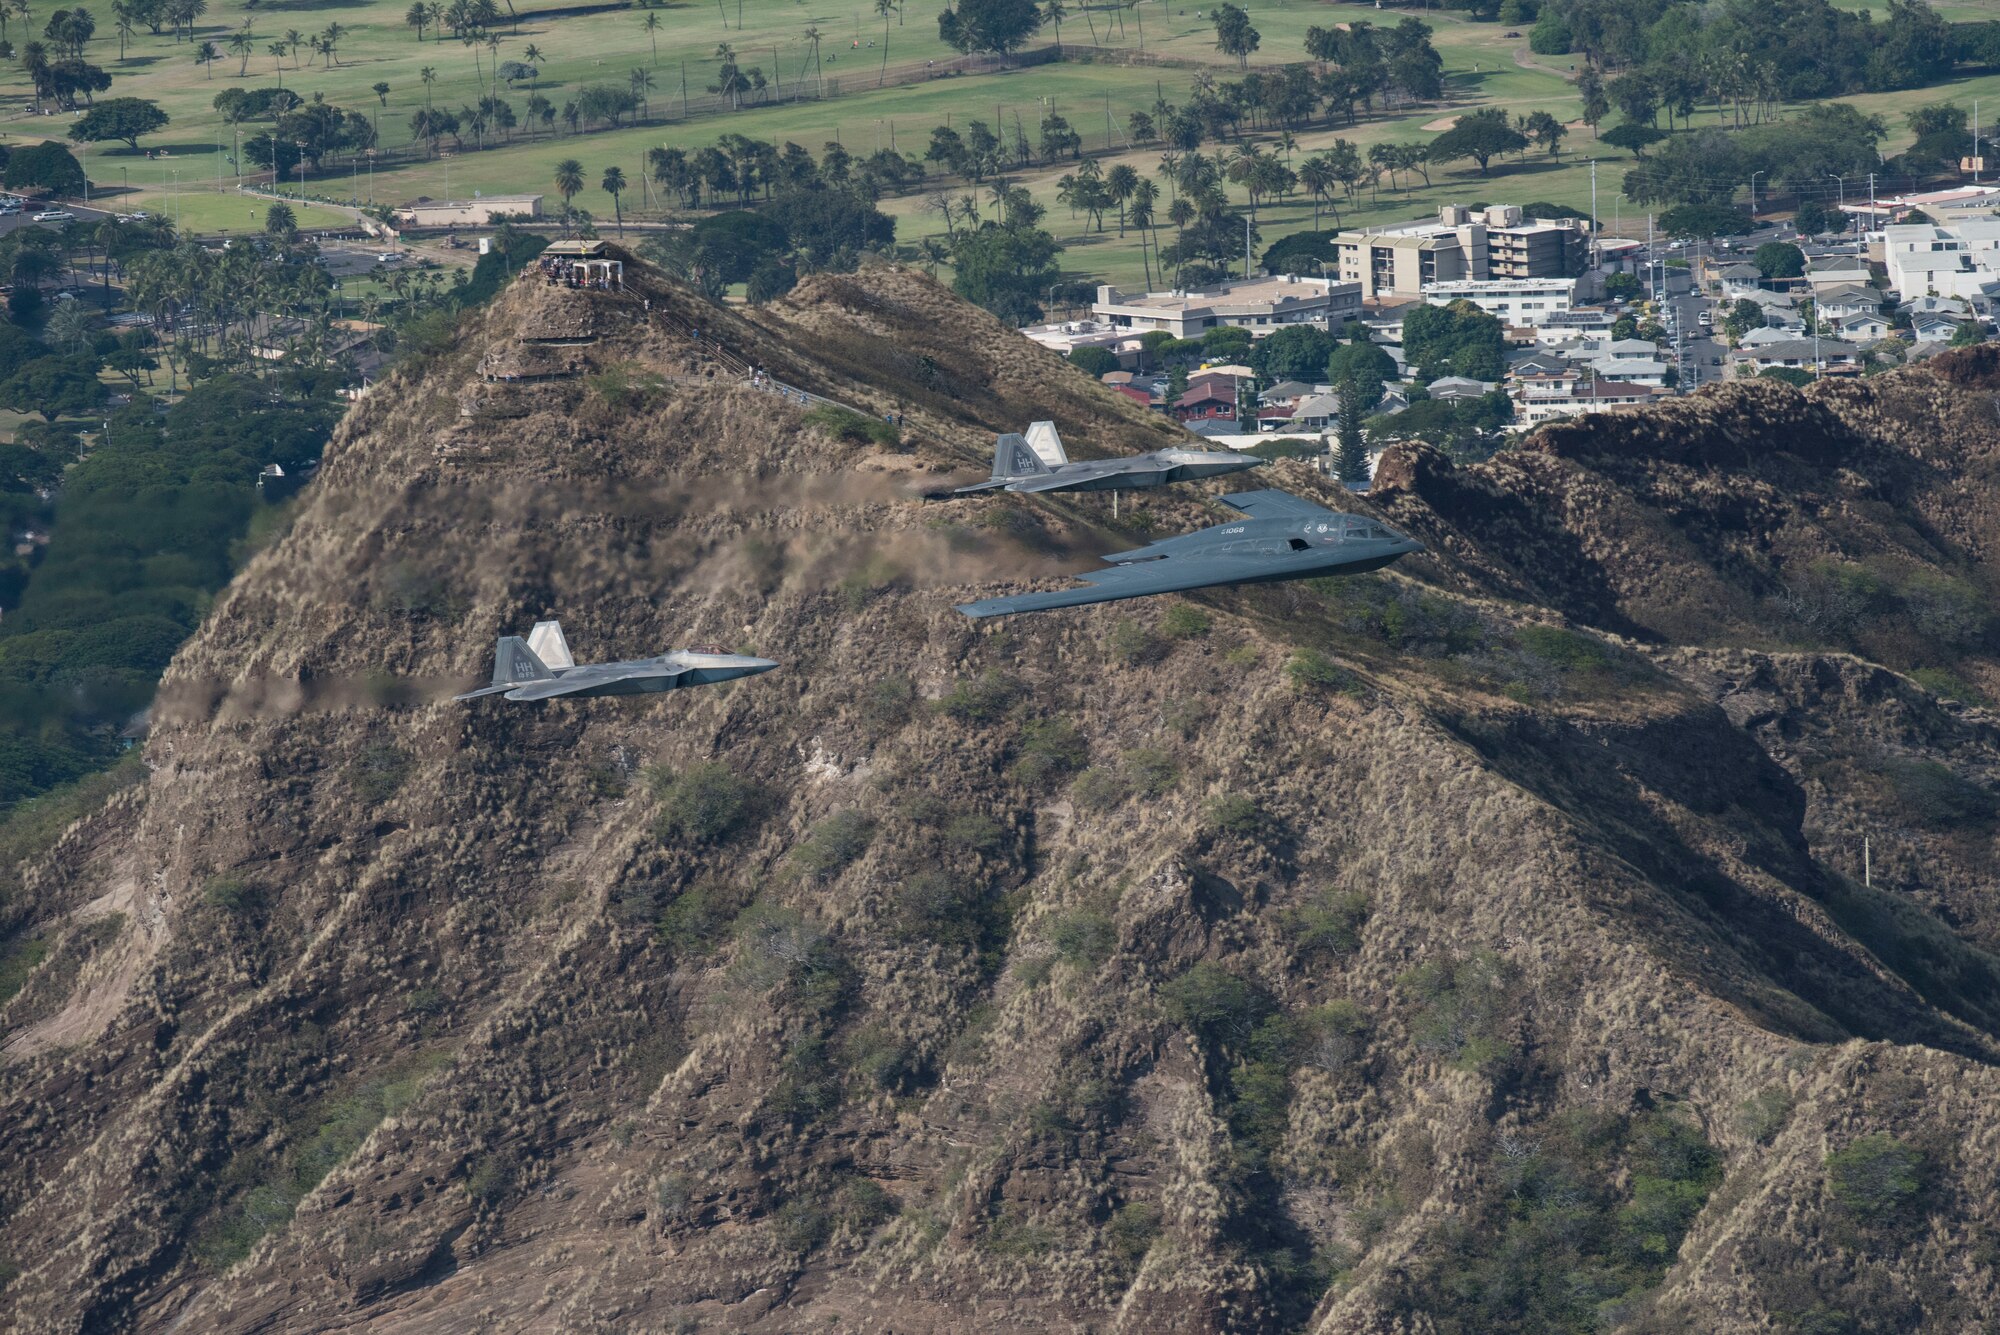 A U.S. Air Force B-2 Spirit bomber deployed from Whiteman Air Force Base, Missouri, and two F-22 Raptors from the 199th Fighter Squadron at Joint Base Pearl Harbor-Hickam, Hawaii, fly in formation near Diamond Head State Monument, Hawaii, during an interoperability training mission Jan. 15, 2019.